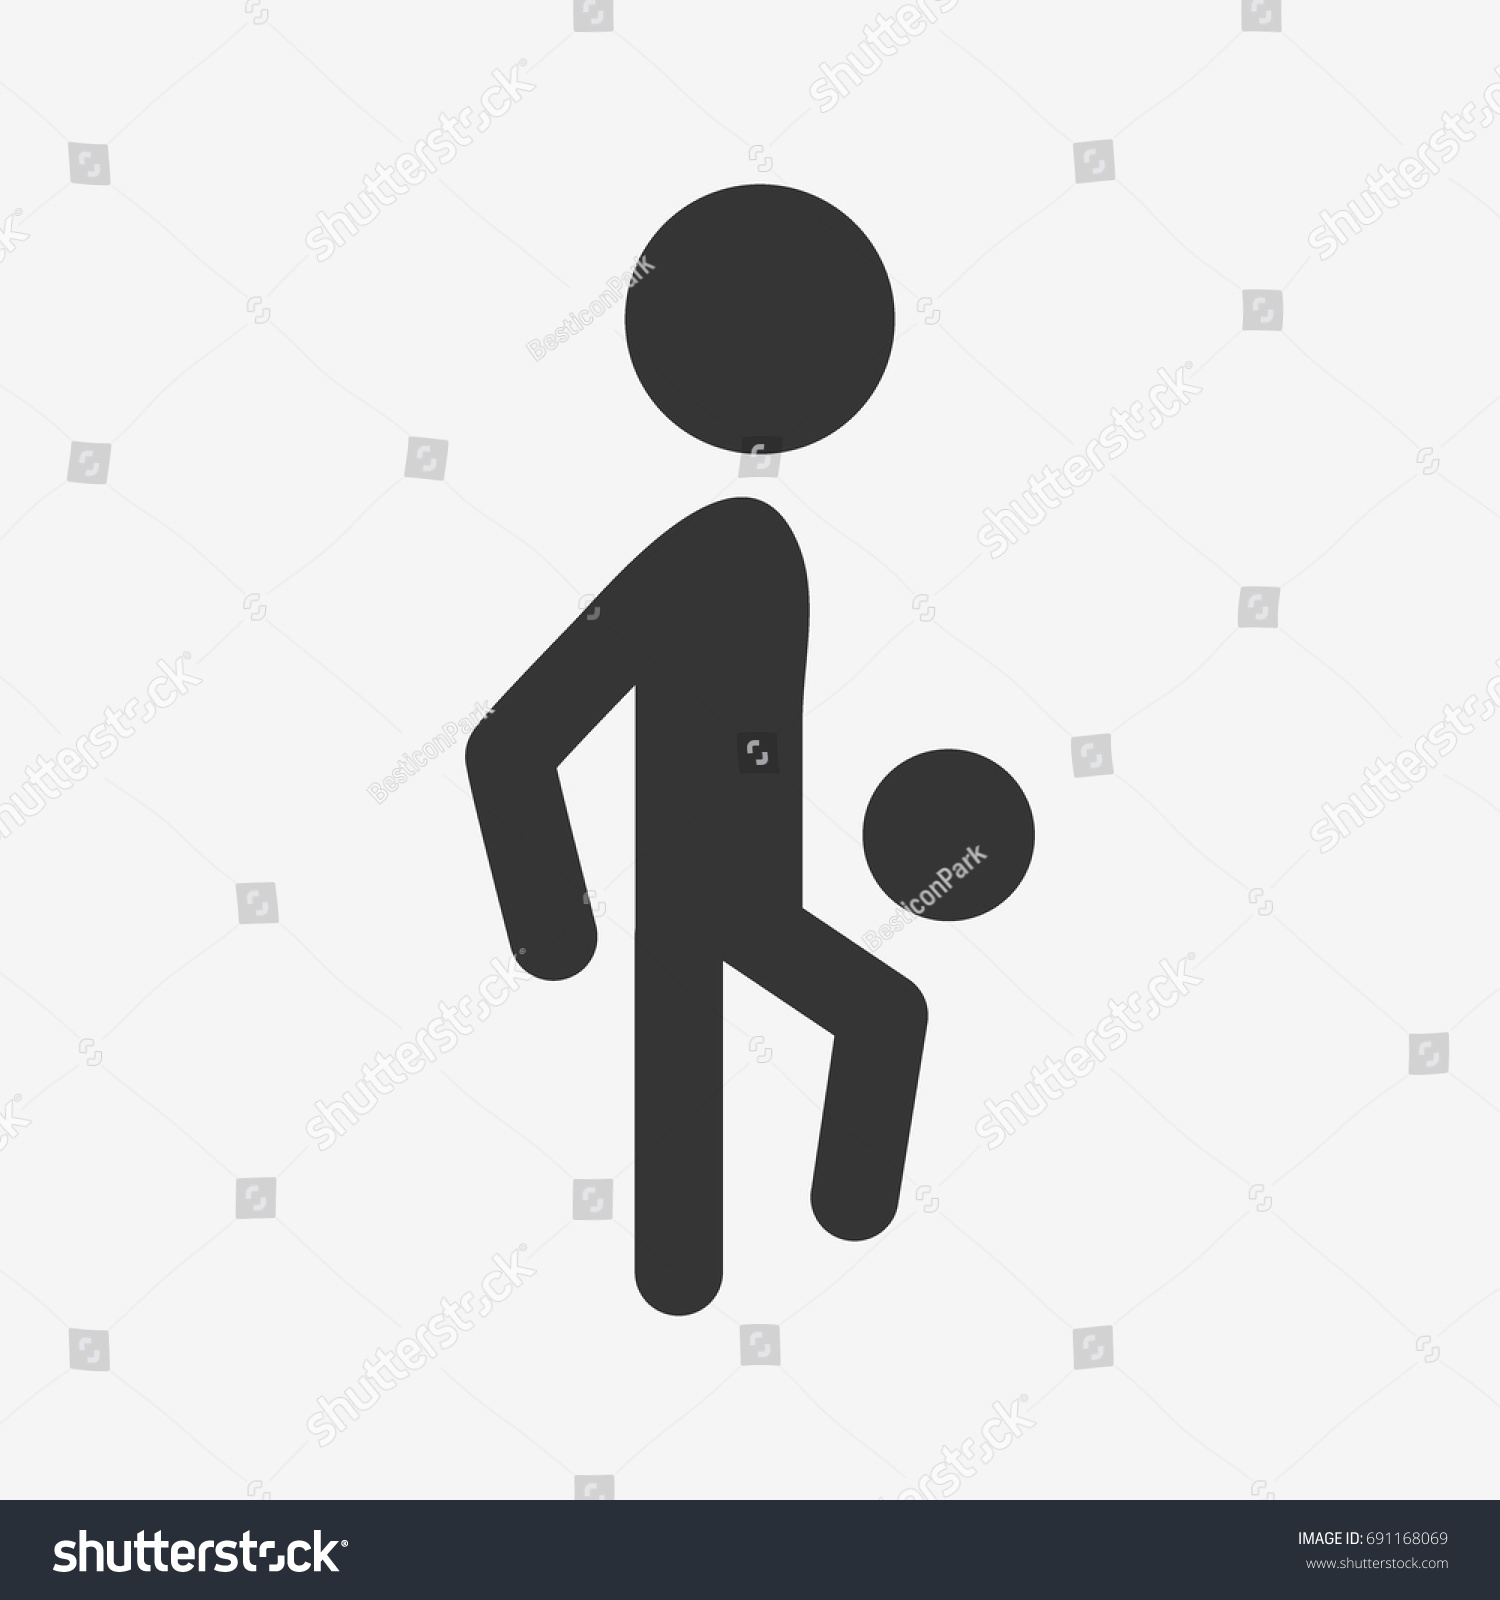 Set of Silhouettes of Soccer Players in various Poses with the 